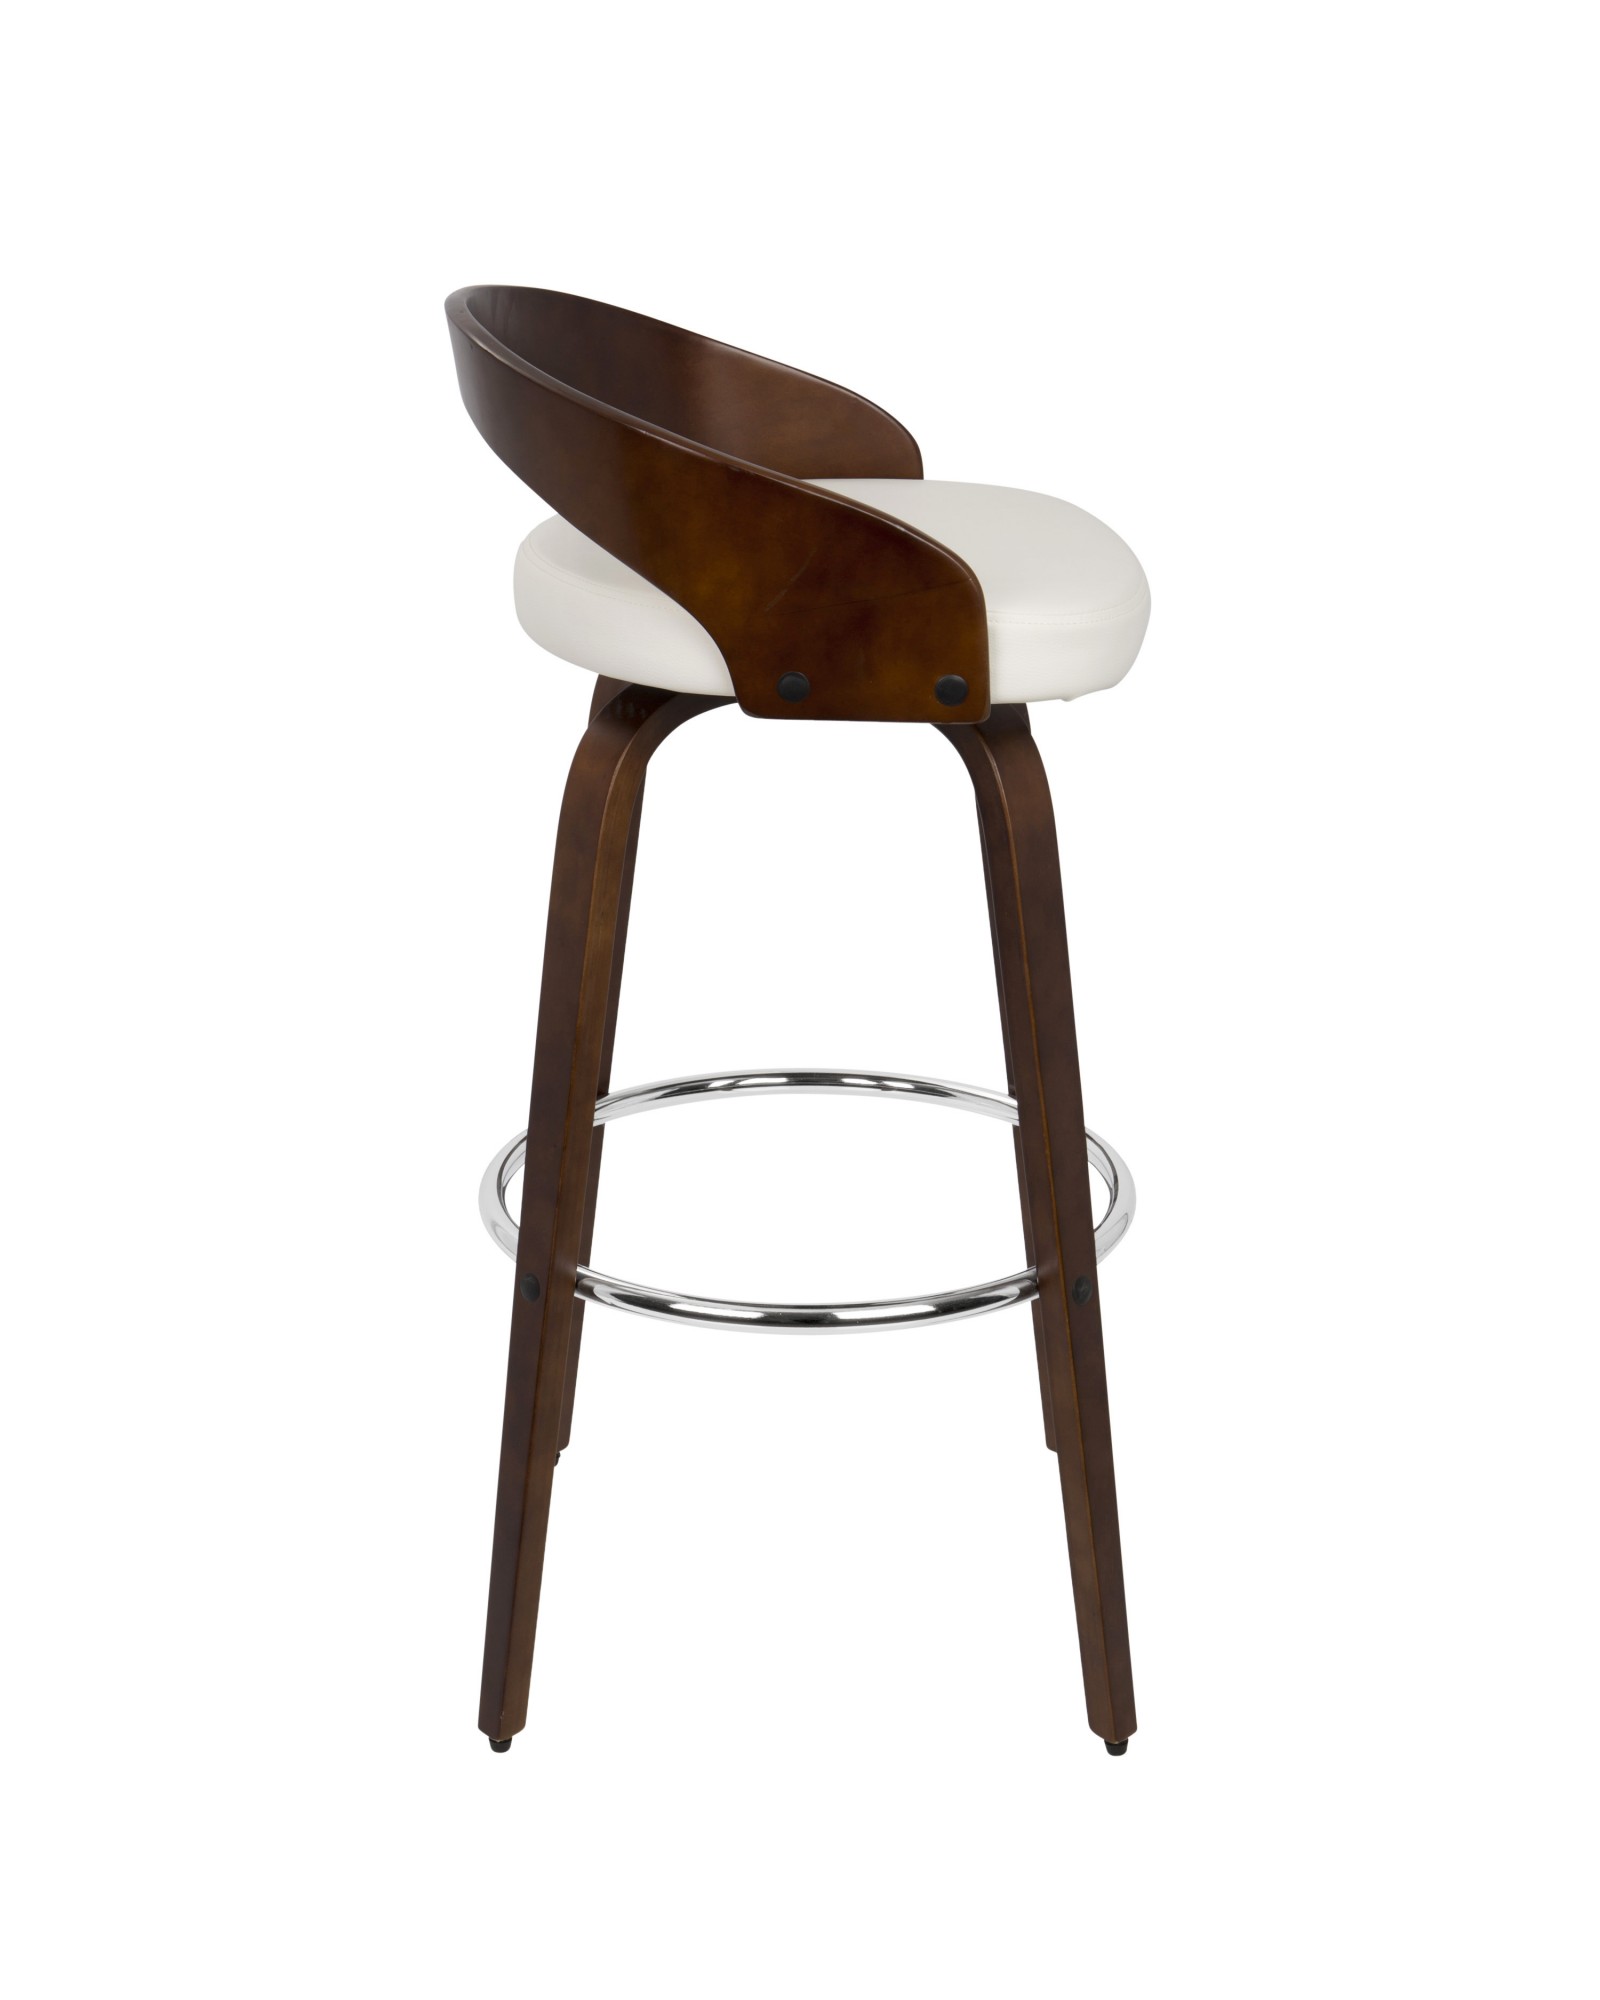 Grotto Mid-Century Modern Barstool with Swivel in Cherry with White Faux Leather